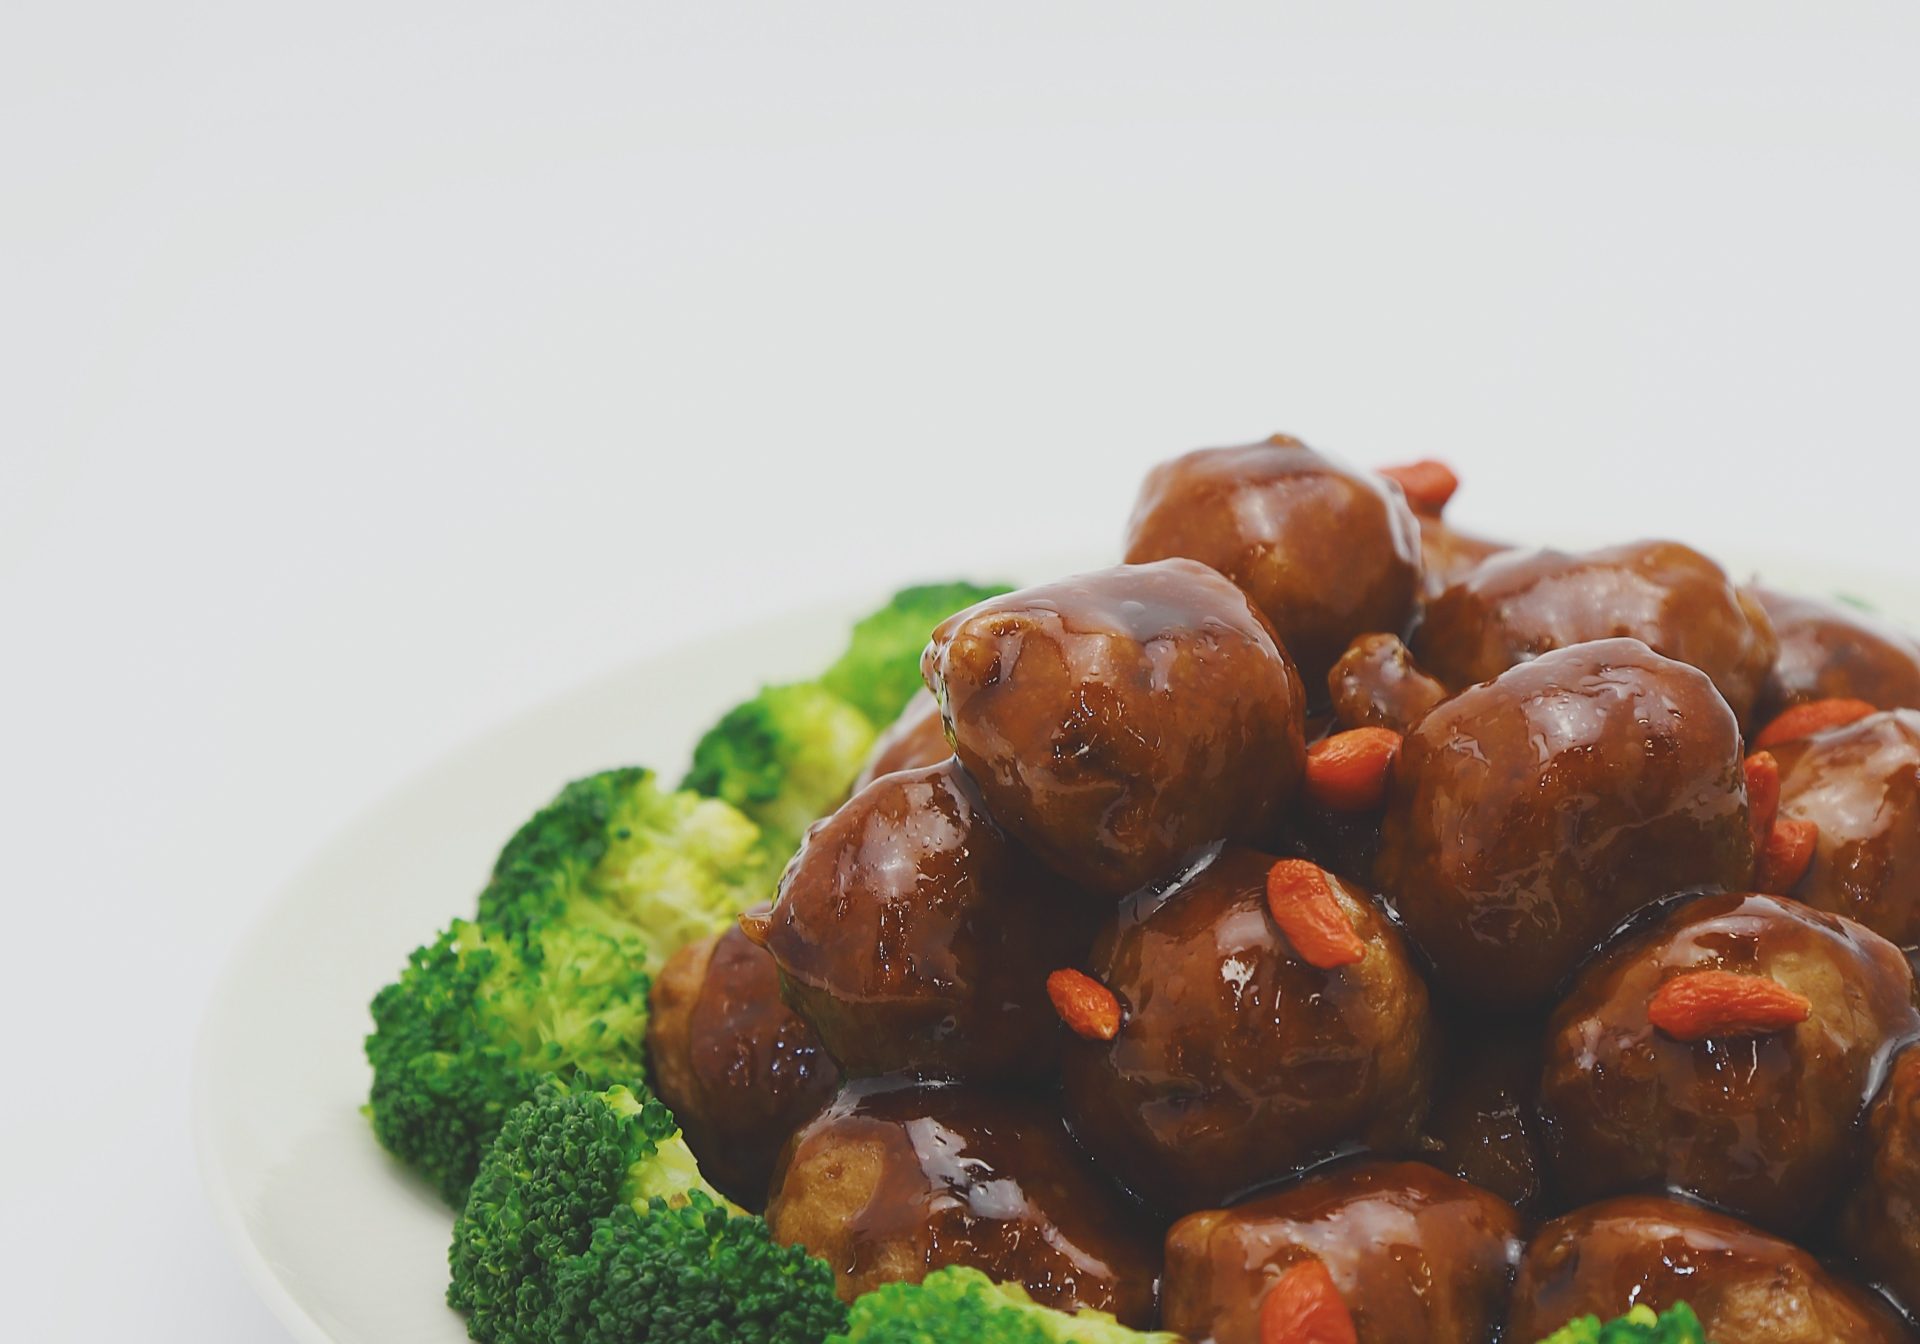 Meatballs in sauce with broccoli around it lying on a white plate with white background